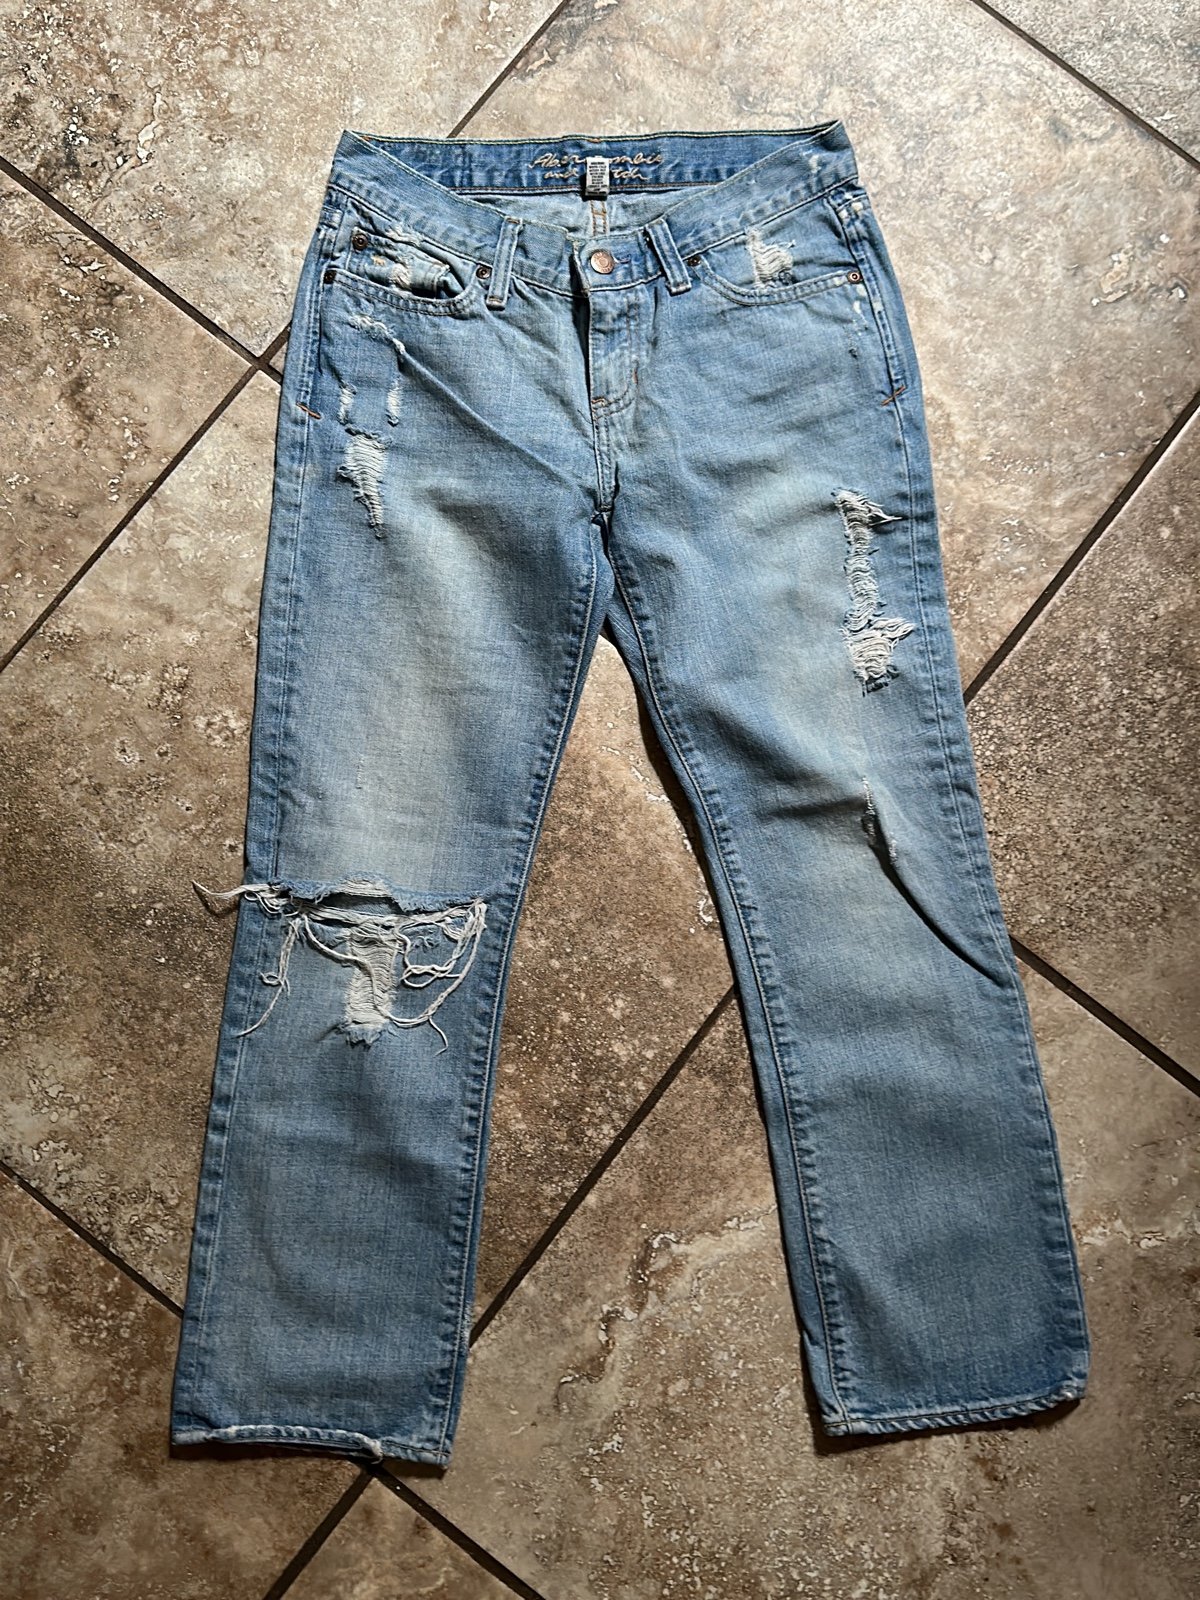 Custom Abercrombie and Fitch jeans 0 kszqQKPXL Discount